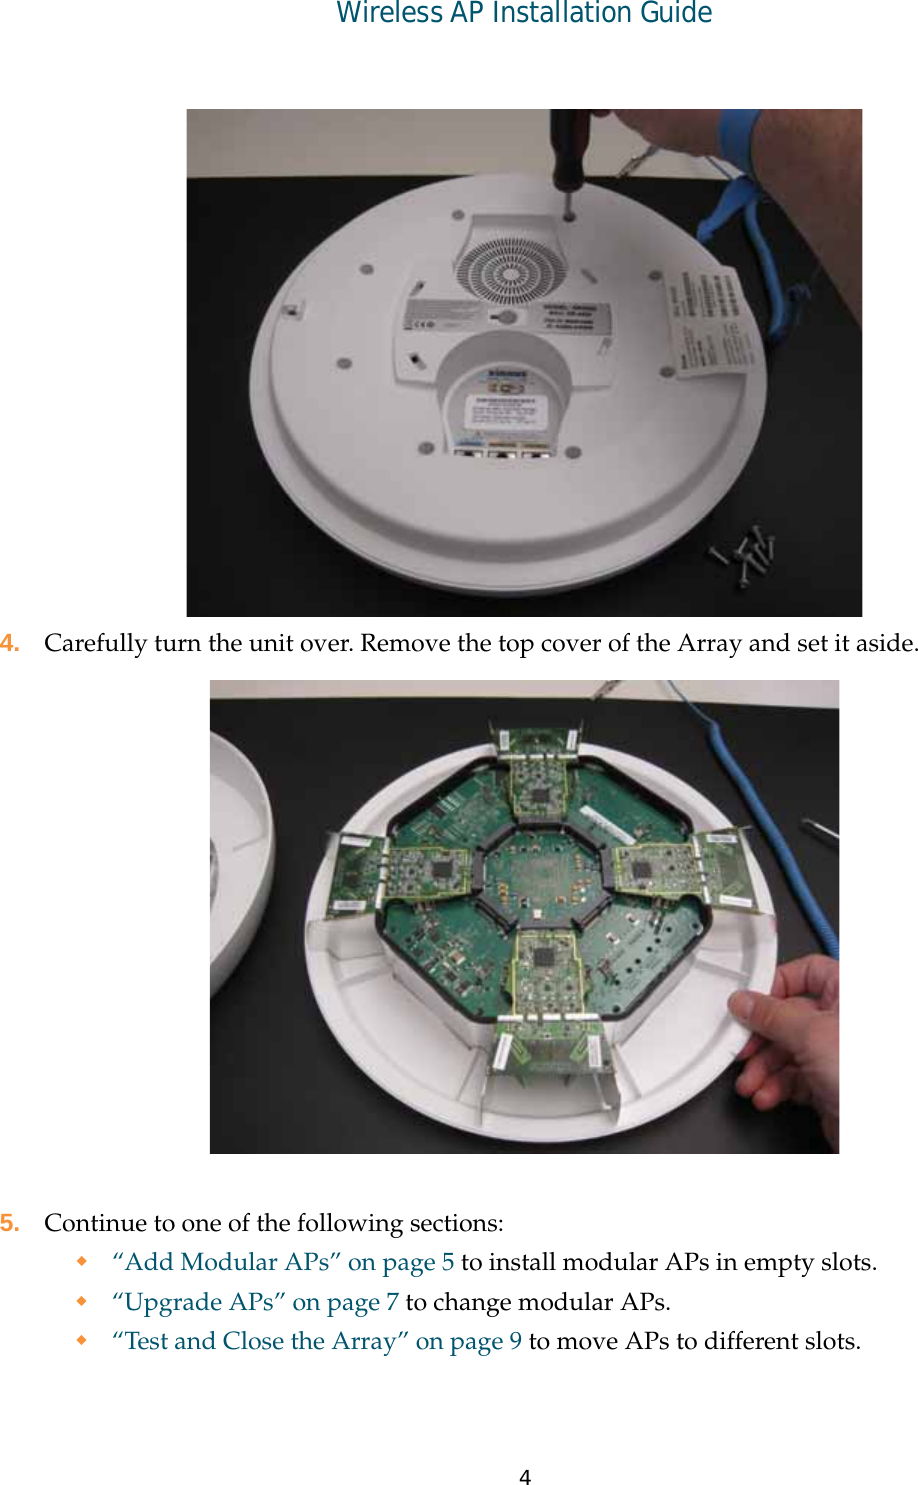 4Wireless AP Installation Guide4. Carefully turn the unit over. Remove the top cover of the Array and set it aside.5. Continue to one of the following sections:“Add Modular APs” on page 5 to install modular APs in empty slots.“Upgrade APs” on page 7 to change modular APs. “Test and Close the Array” on page 9 to move APs to different slots.